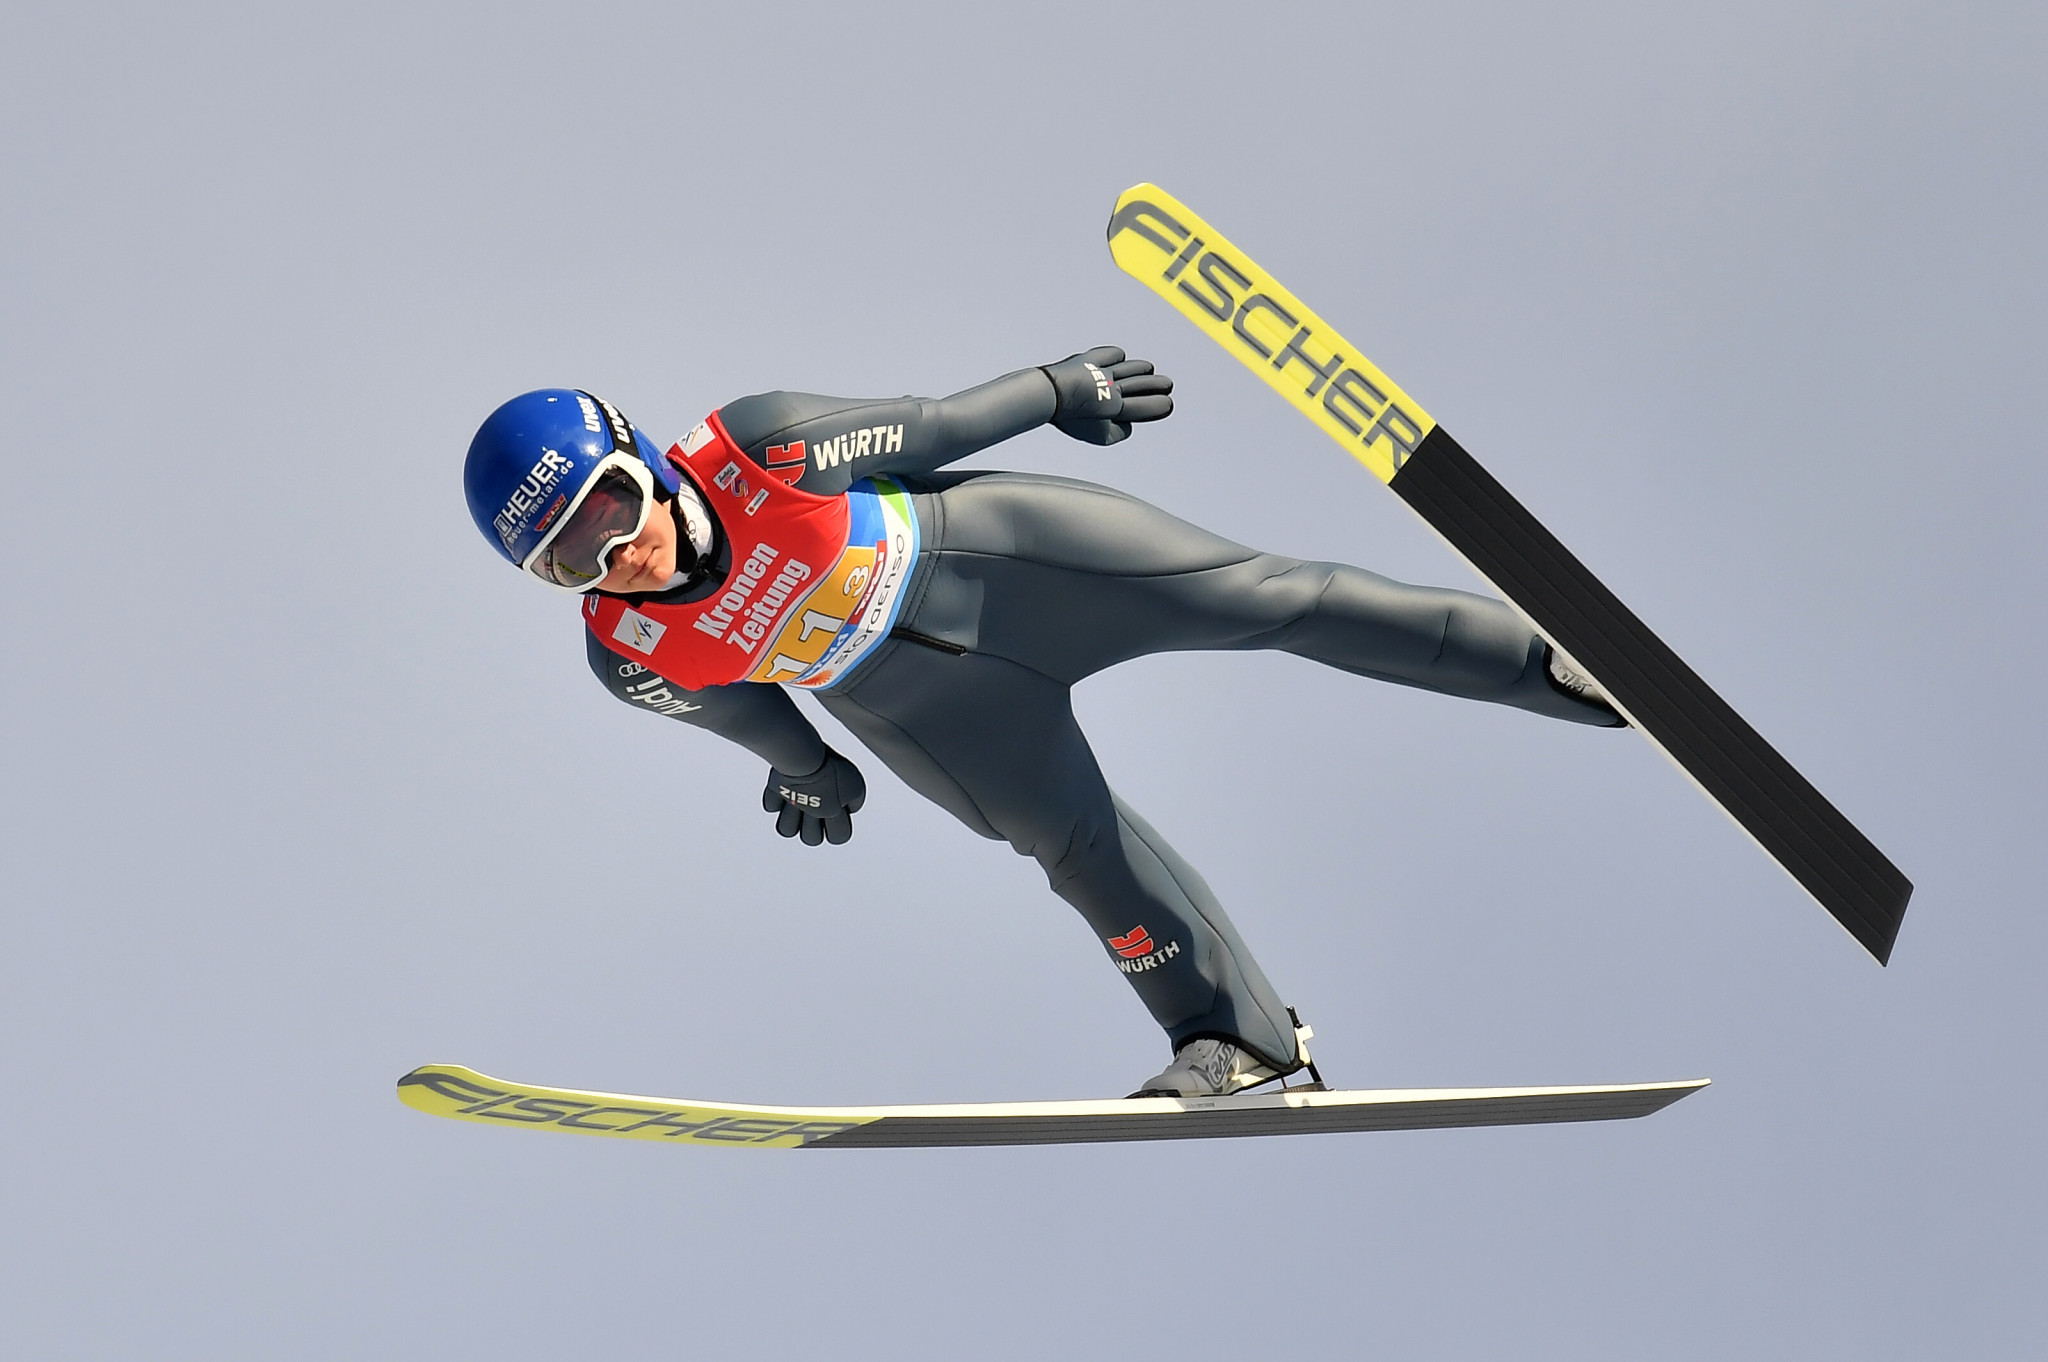 Carina Vogt helped Germany win the women's team ski jumping event in the Austrian resort ©Getty Images